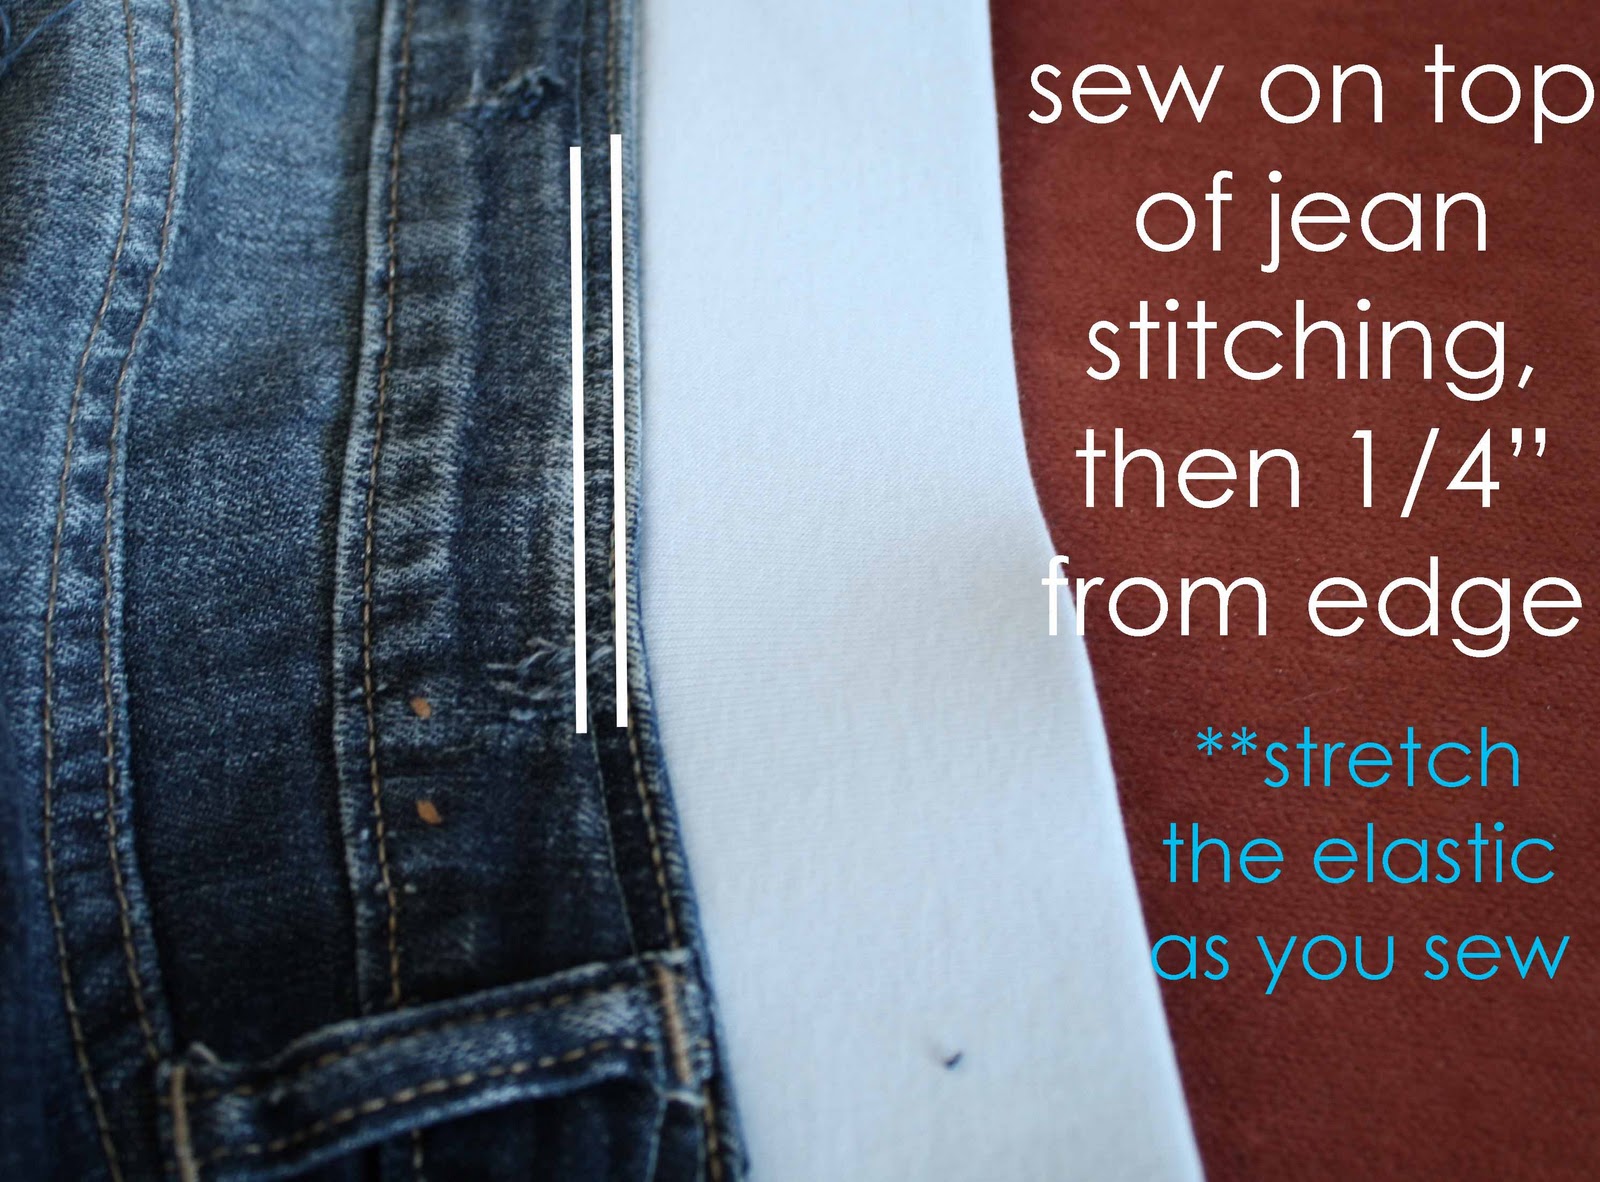 How to Sew a Waistband Extender for Jeans - Maternity Sewing